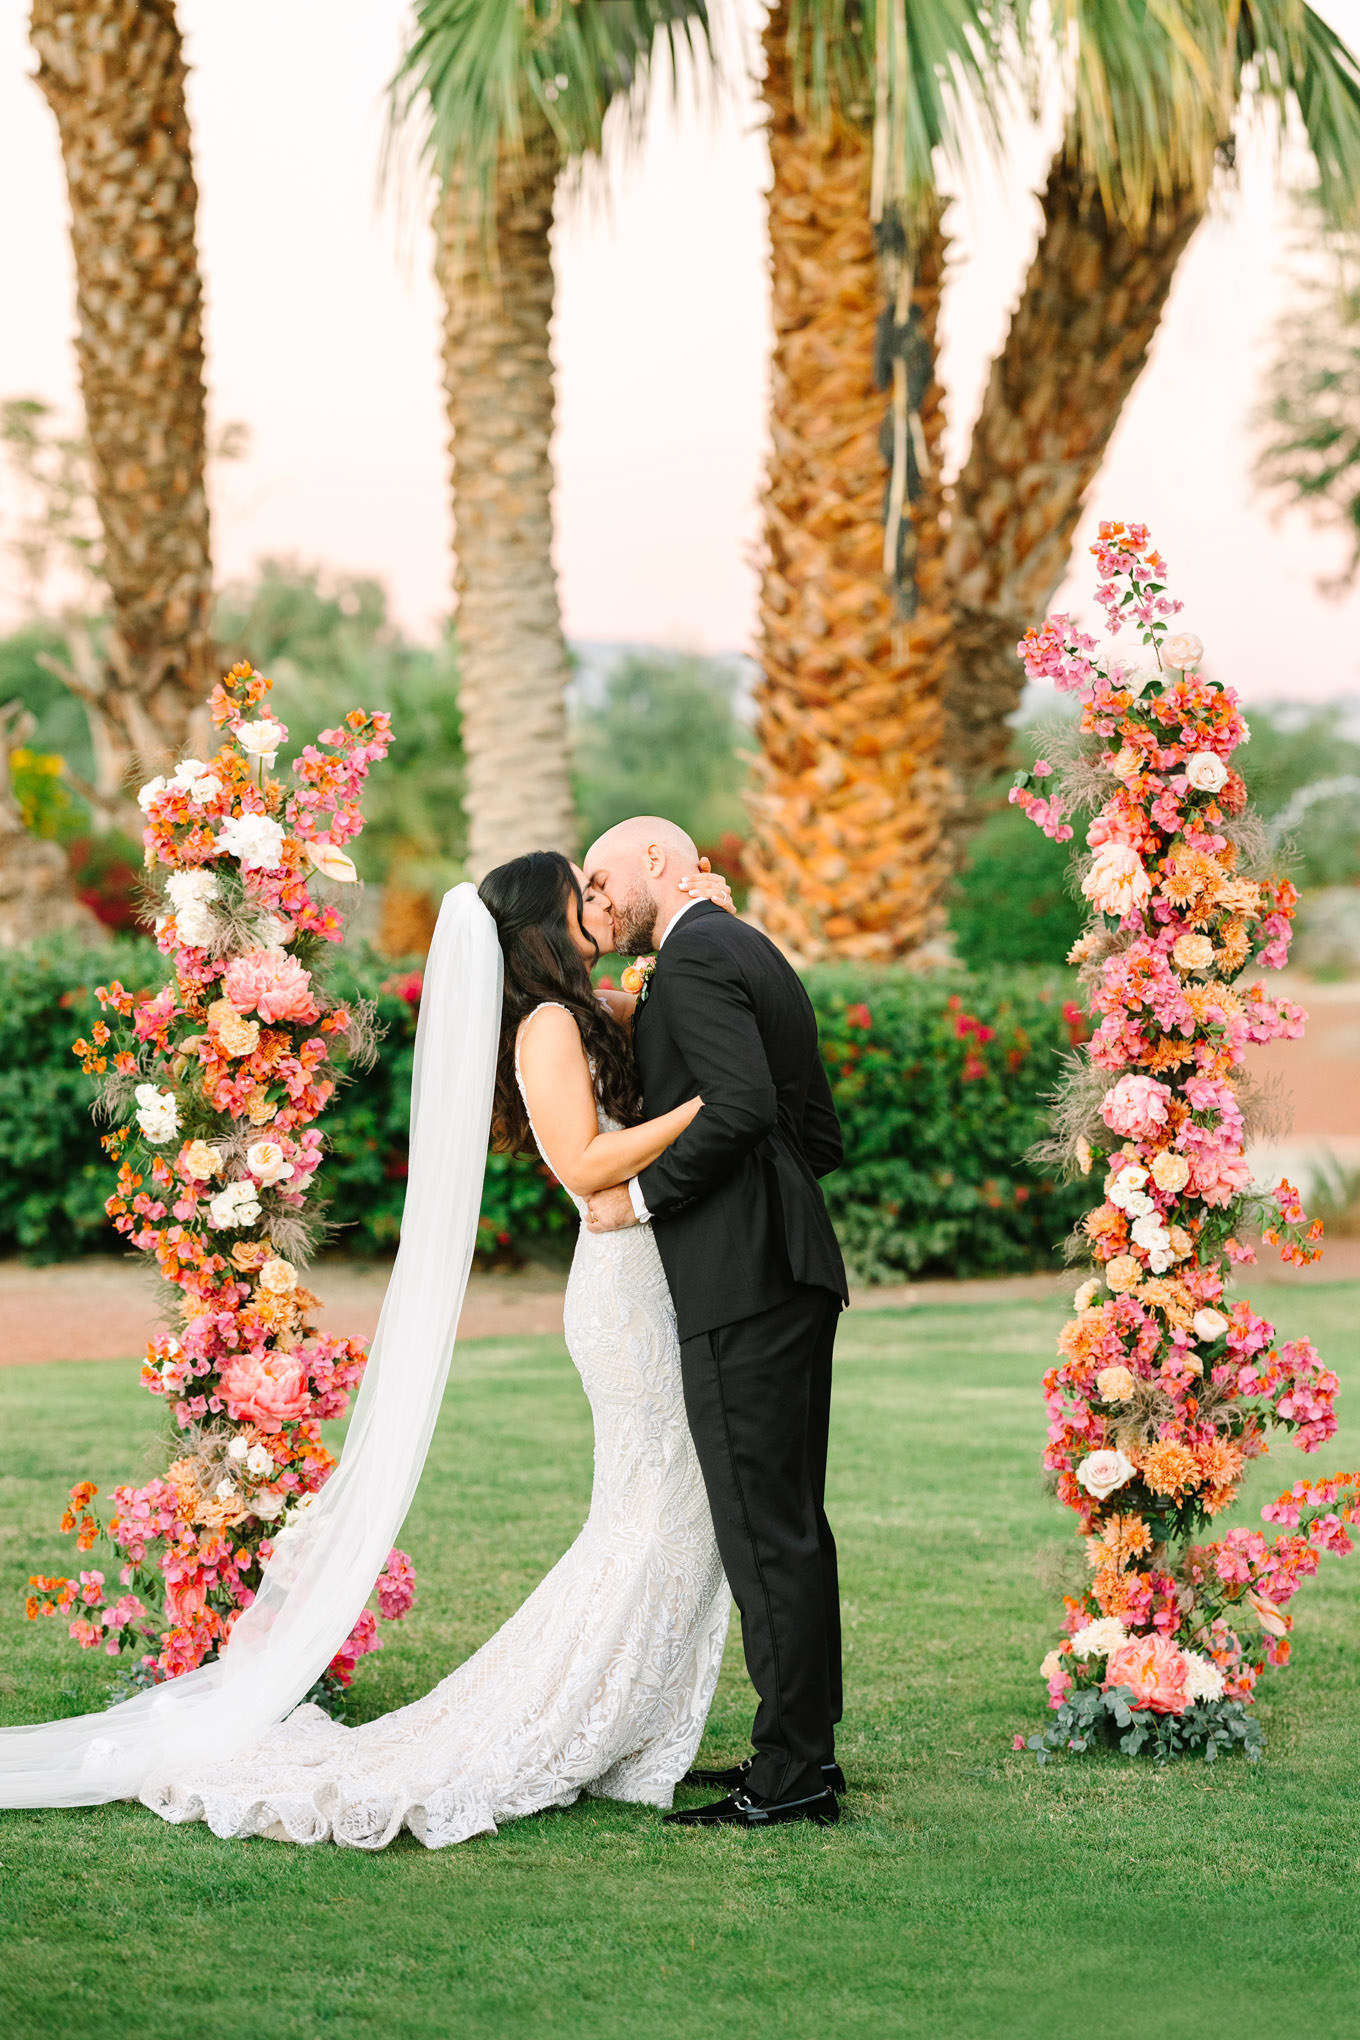 The ceremony kiss | Pink Bougainvillea Estate wedding | Colorful LA wedding photography | #bougainvilleaestate #palmspringswedding #palmspringsweddingvenue #palmspringsphotographer Source: Mary Costa Photography | Los Angeles